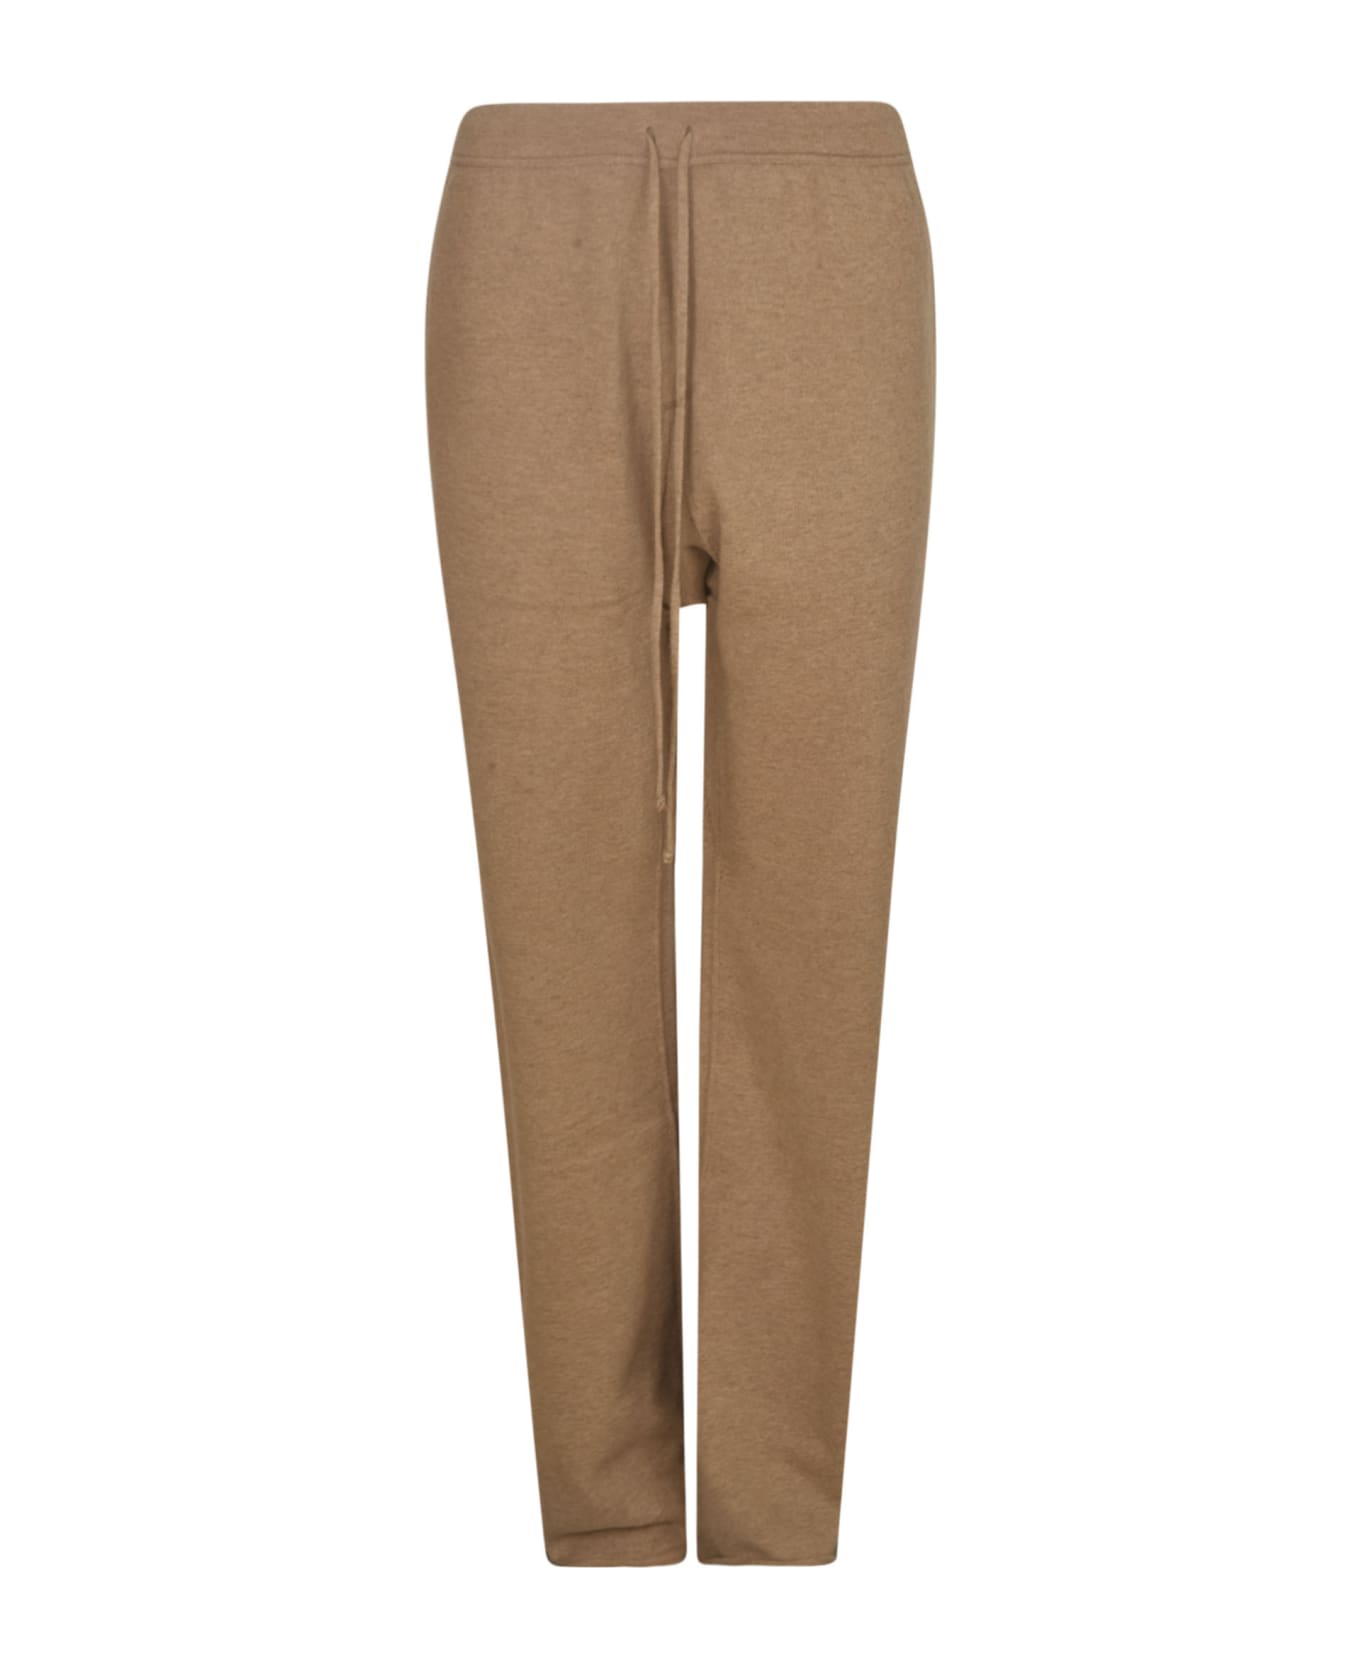 Maison Margiela Knitted Trousers - 119m